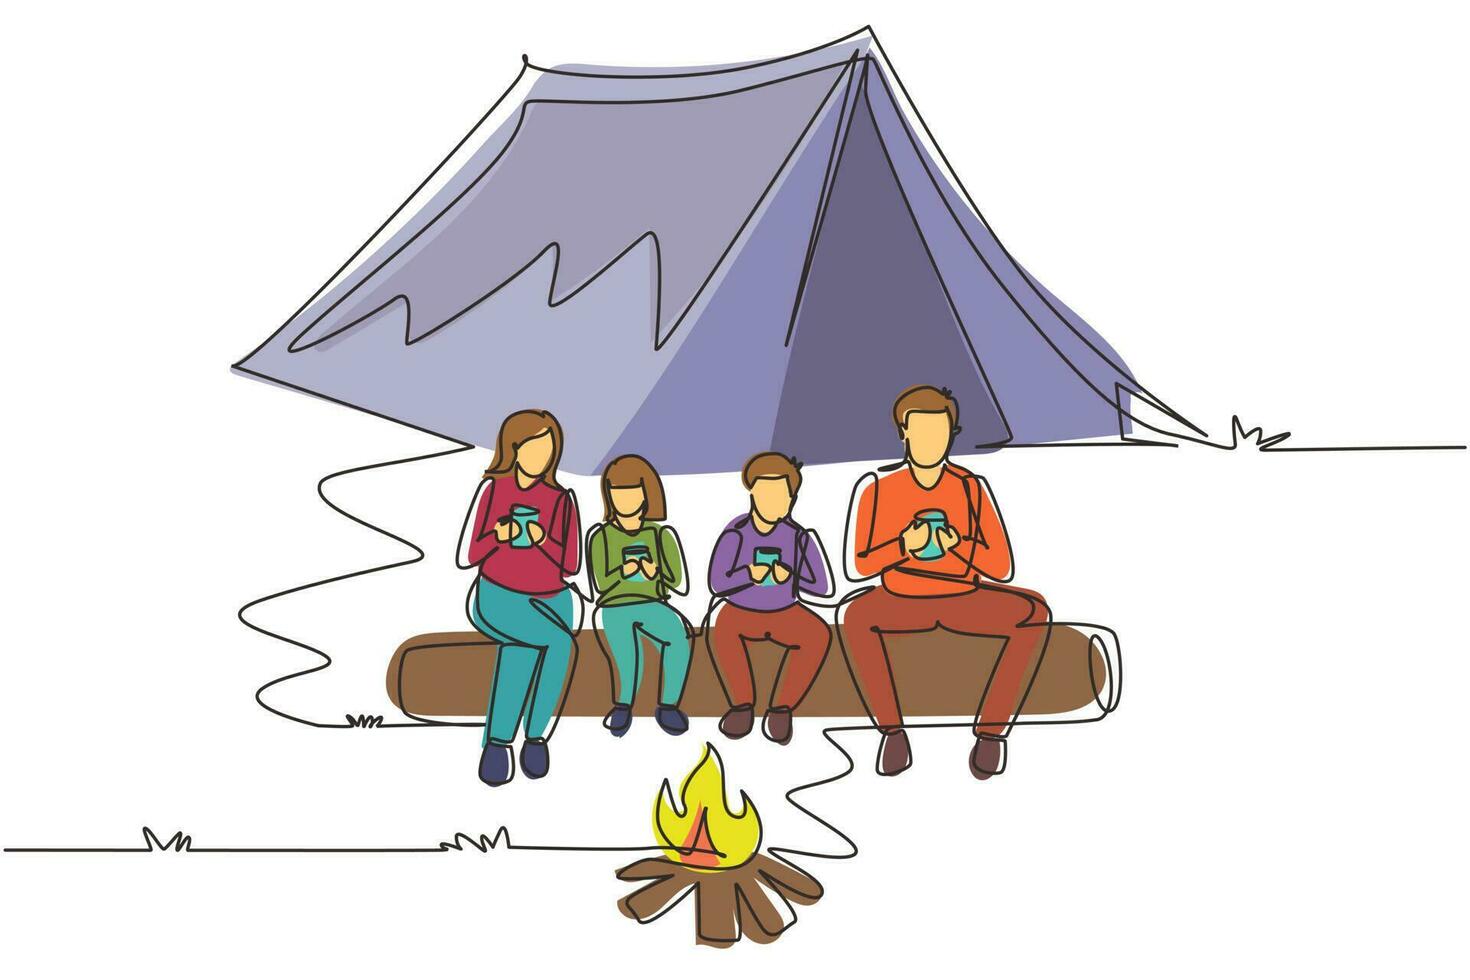 Single one line drawing active hiker family camping with campfire. Drinking hot tea sitting on logs in forest. Mom, dad, son and daughter. Family time. Continuous line draw design vector illustration